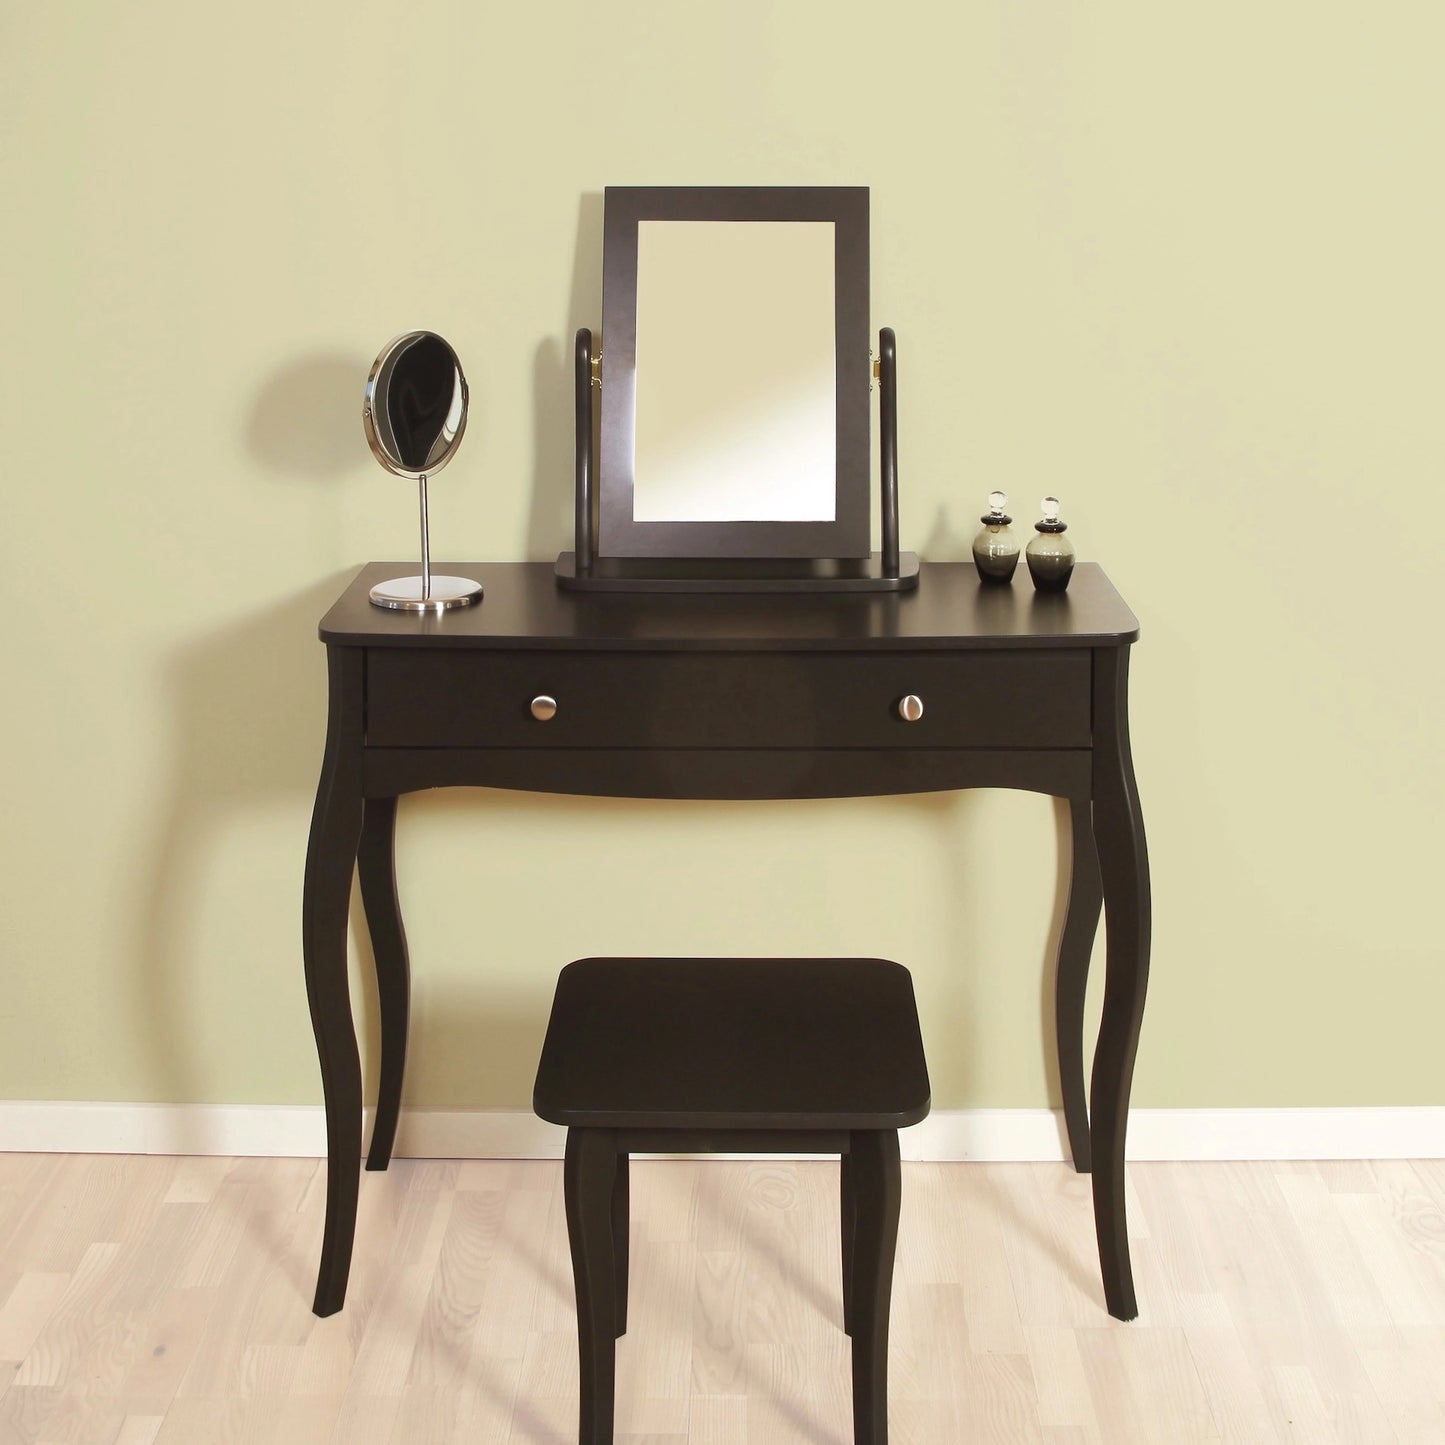 Furniture To Go Baroque 1 Drawer Vanity Included Stool & Mirror Black